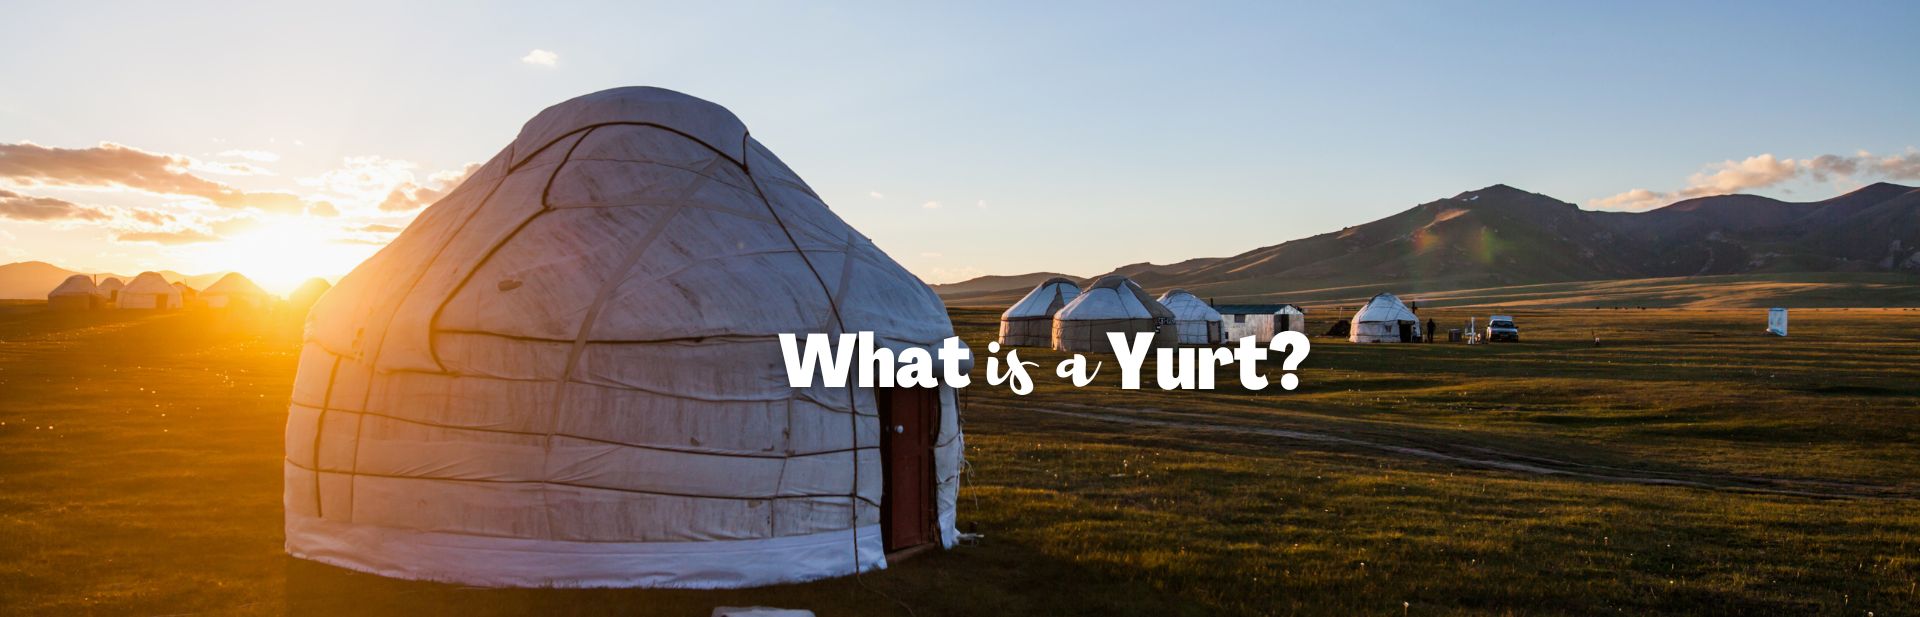 What Is A Yurt? Discovering the Magic of Nomadic Living